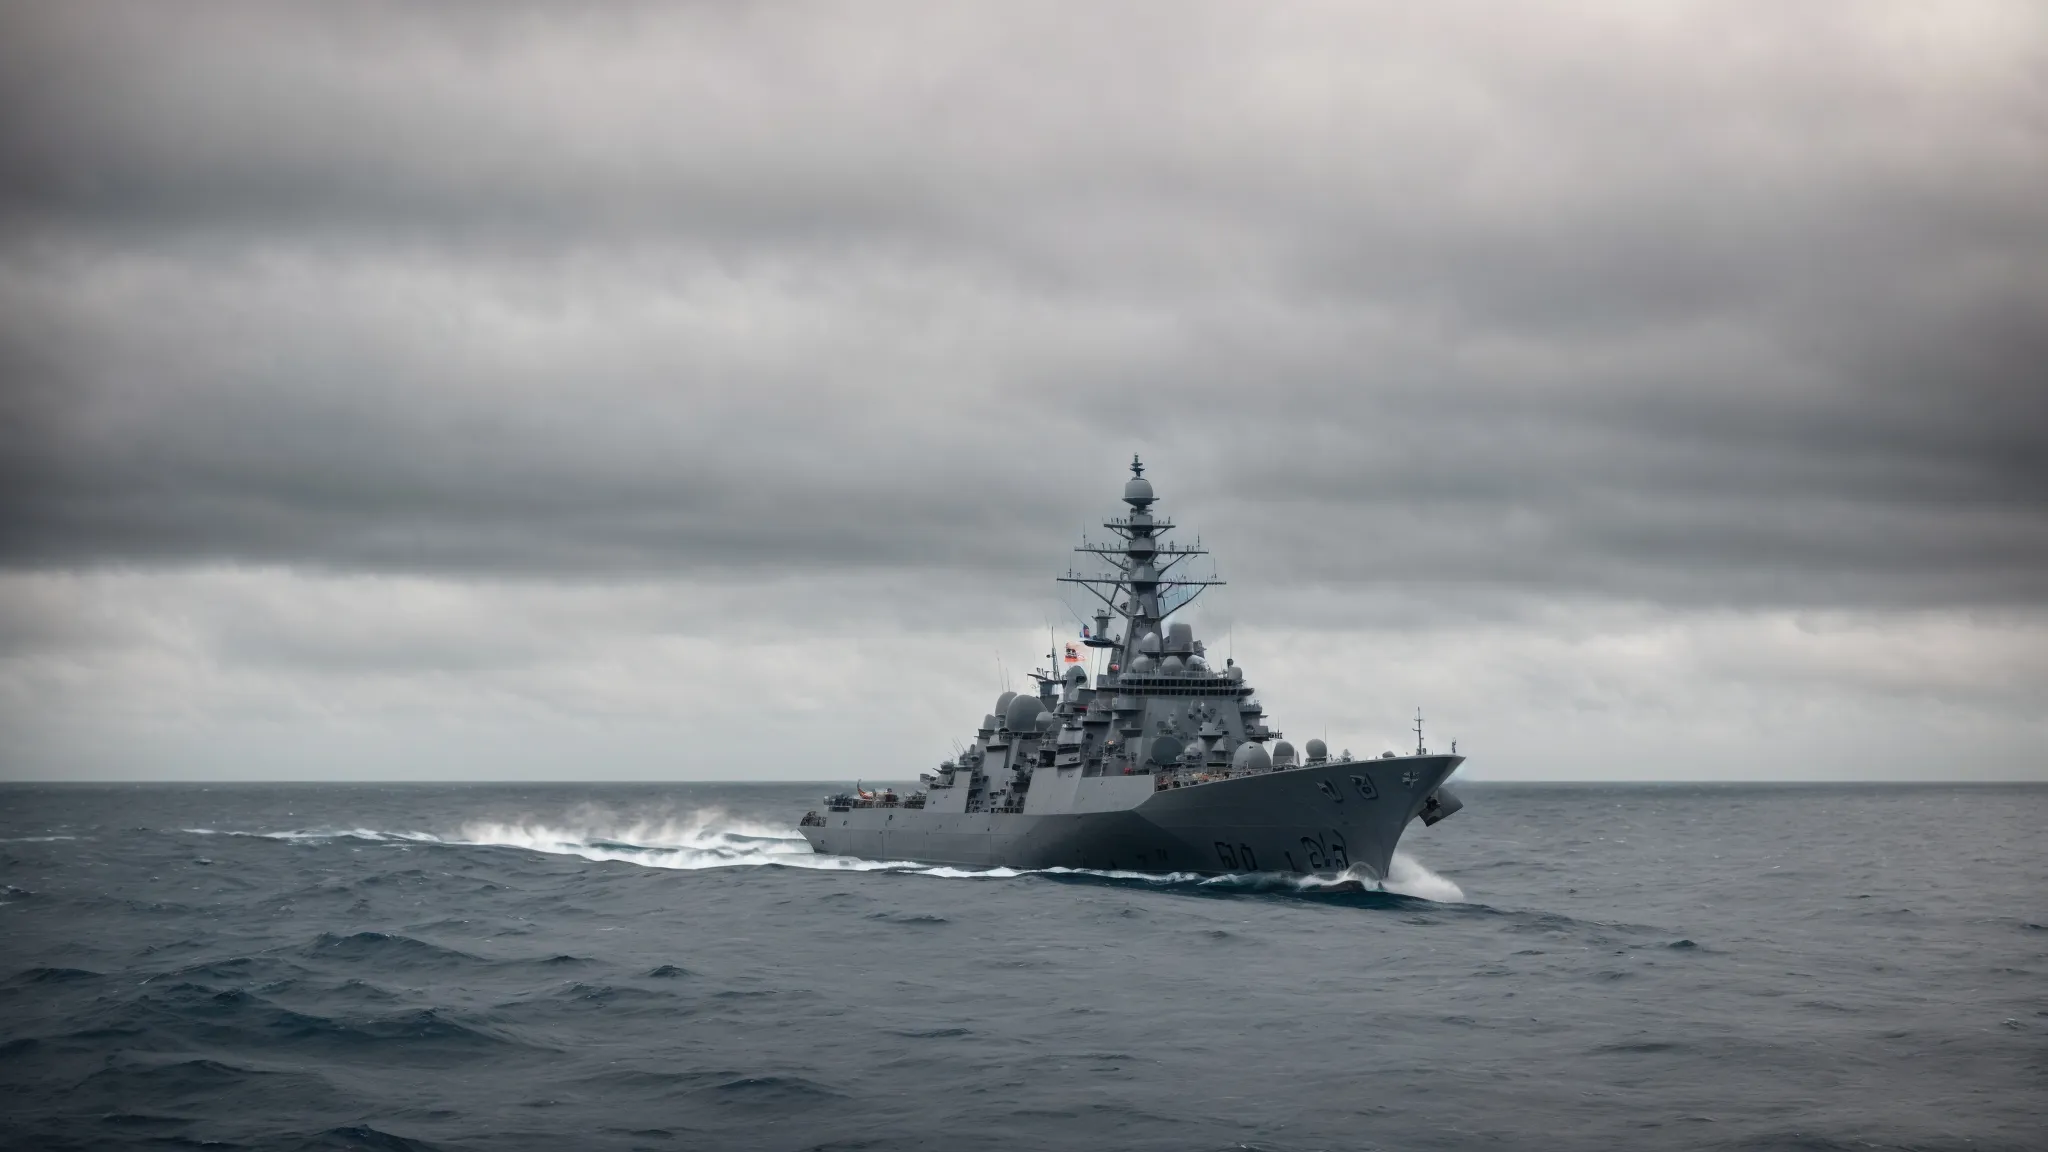 a naval warship patrols the open sea amidst a tense international maritime security situation.